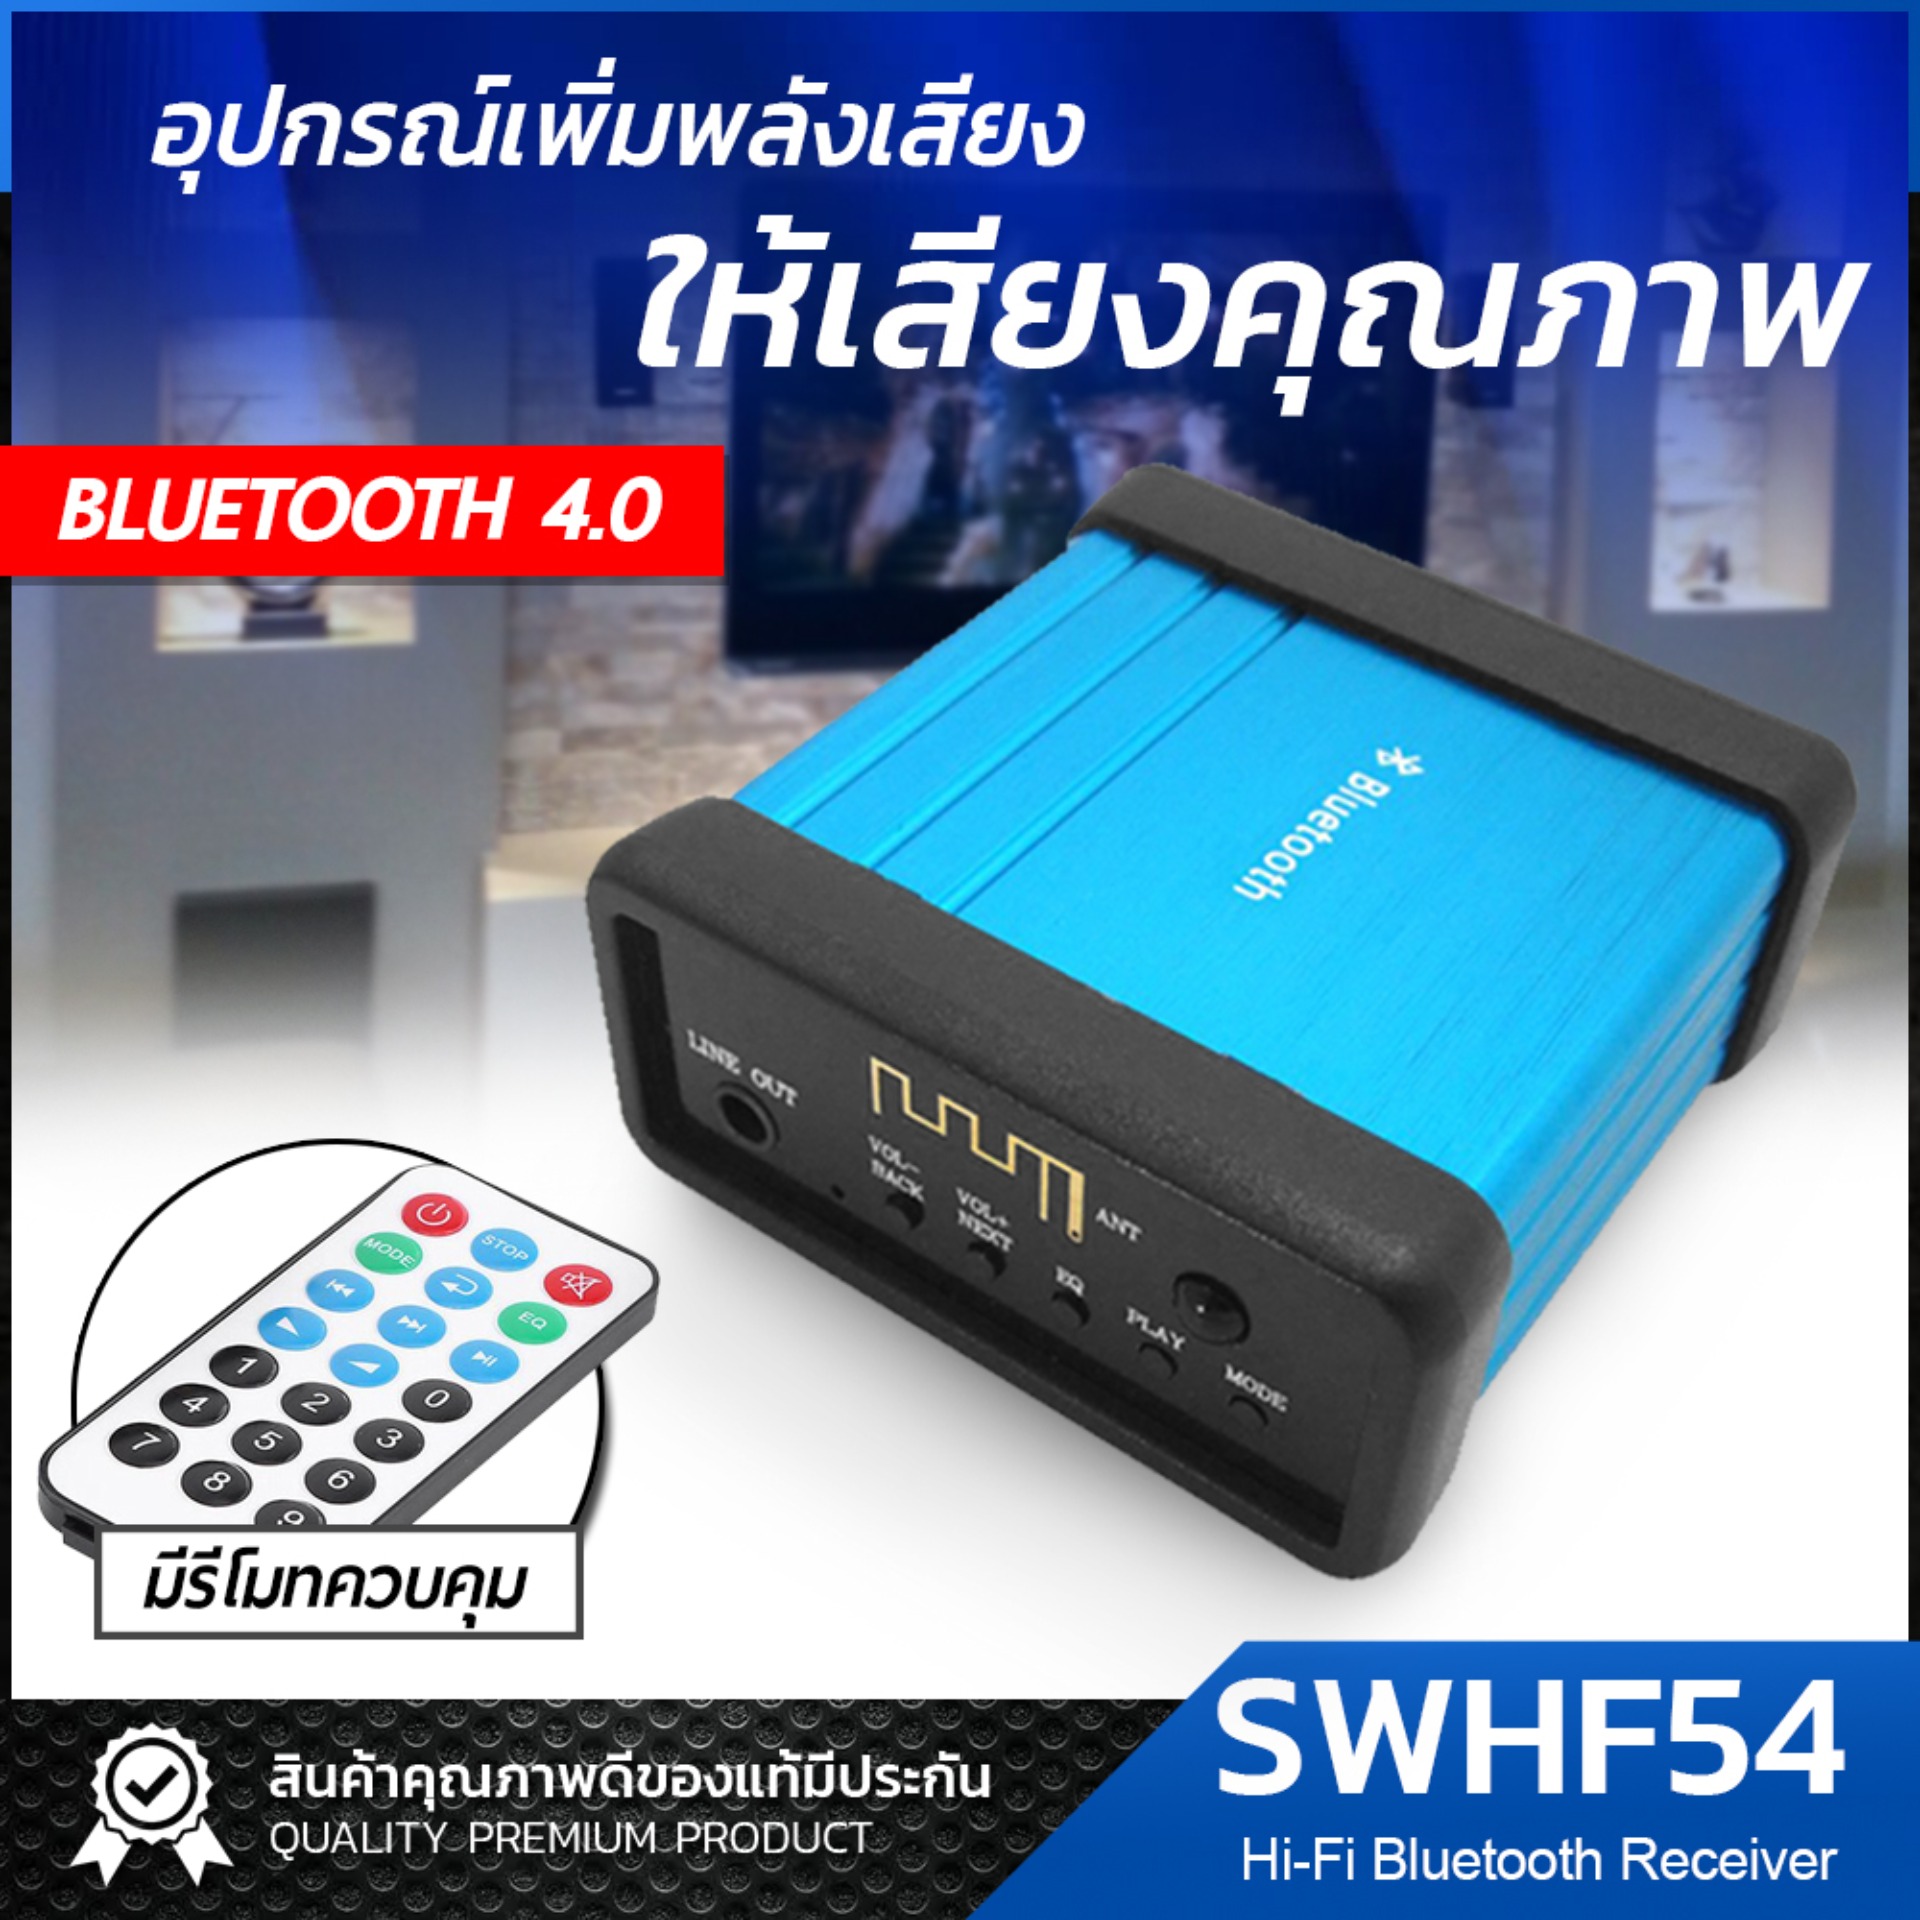 Wireless Bluetooth Receiver Box 3.5mm Jack Bluetooth Audio Music Receiver Adapter Car Aux TF USB Decoding Player for Speaker with remote control (แถมสายAUX*1 สายUSB*1 สายRCA*1 ) / Car kit store